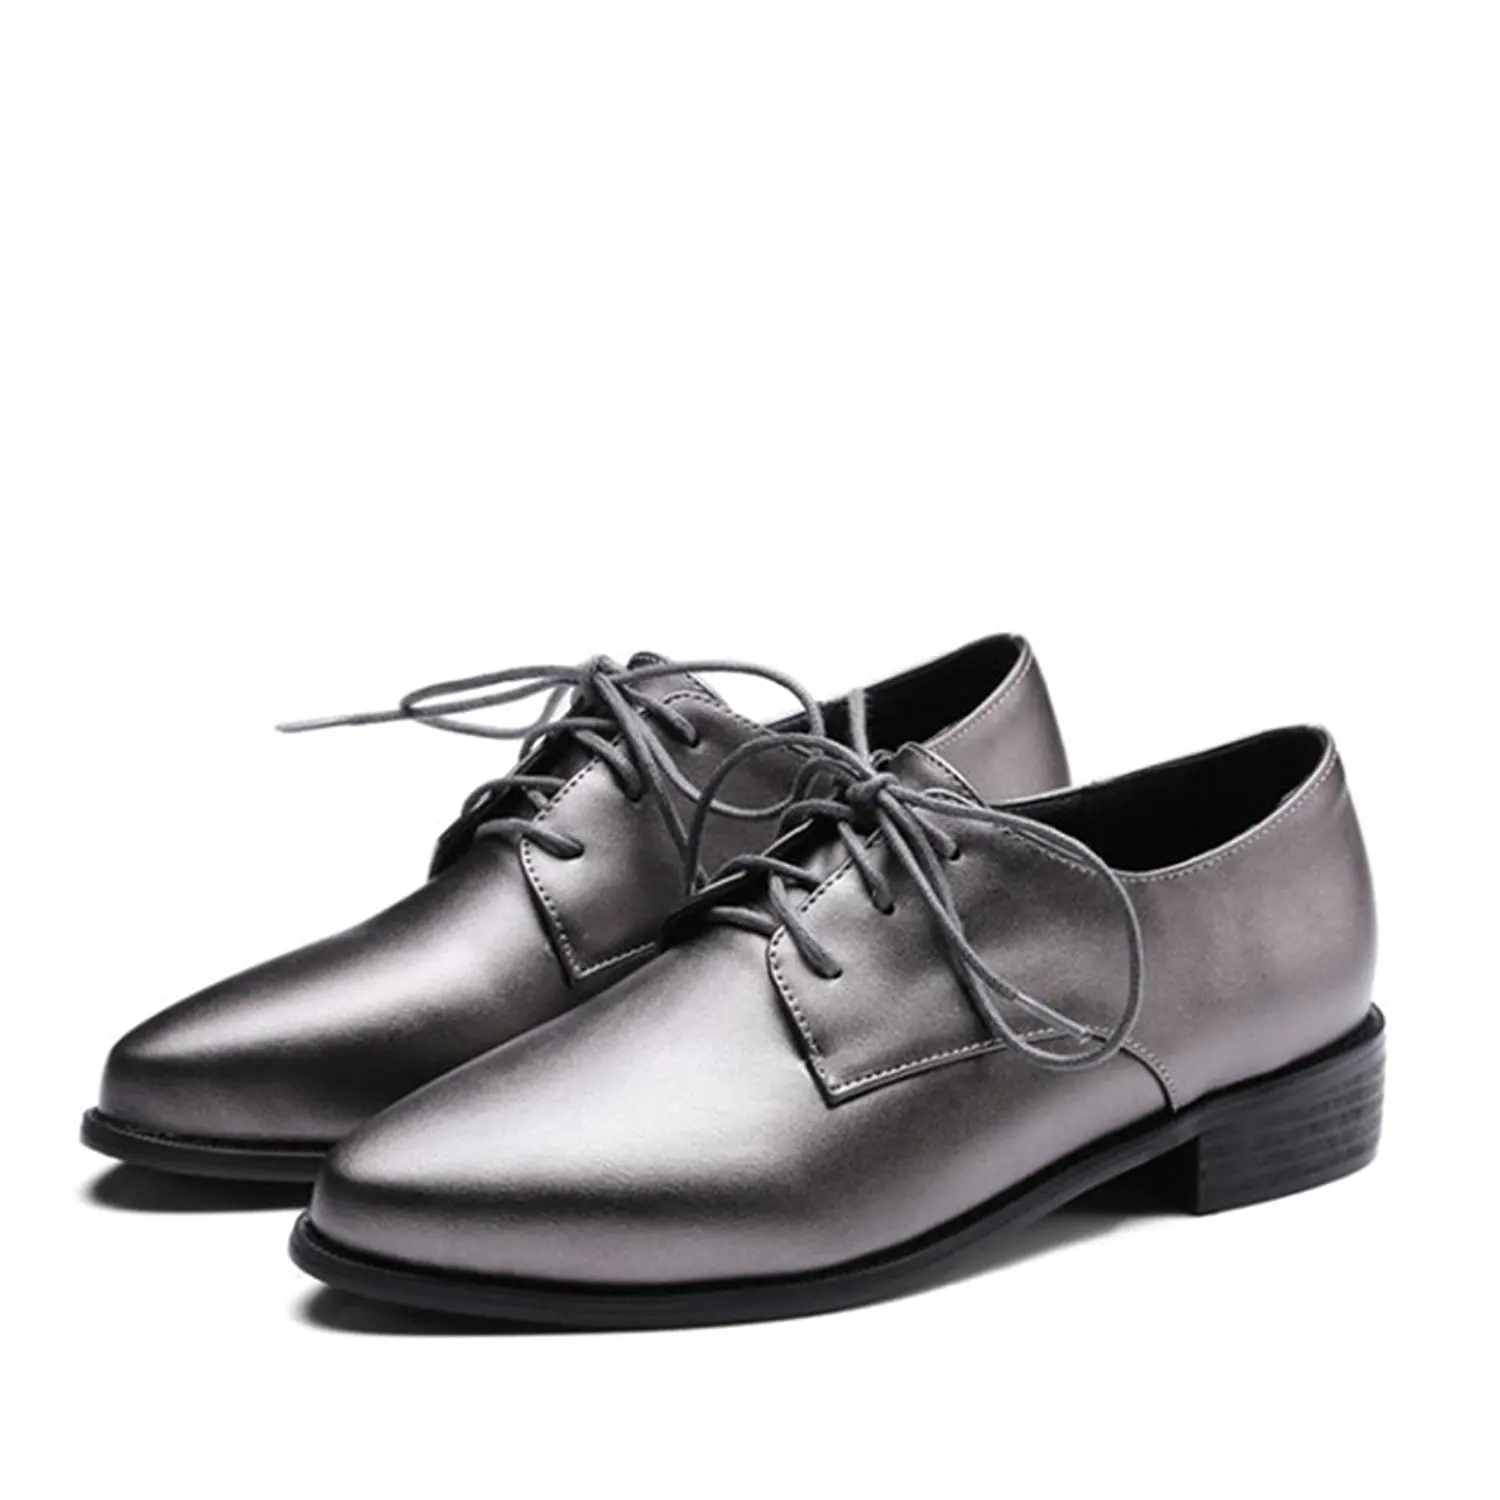 Two Tone Slip-On Oxford Casual Shoes 